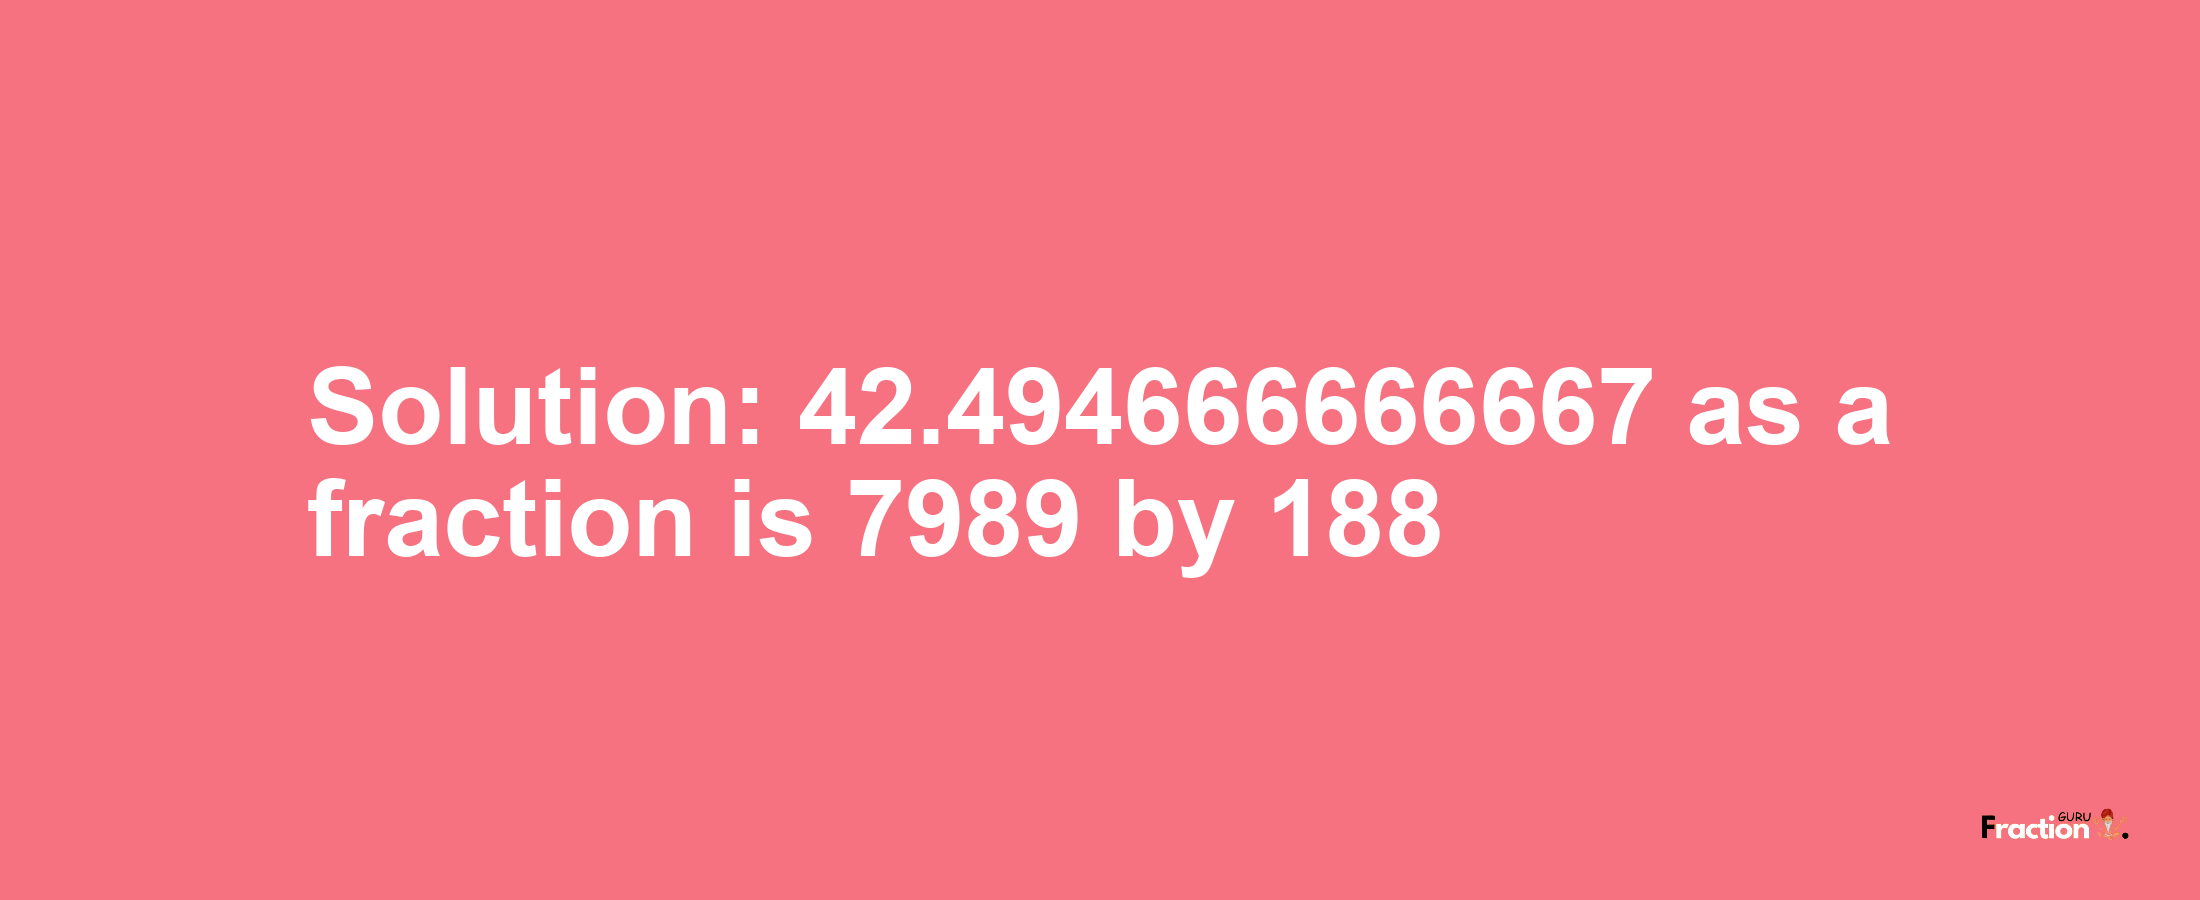 Solution:42.494666666667 as a fraction is 7989/188